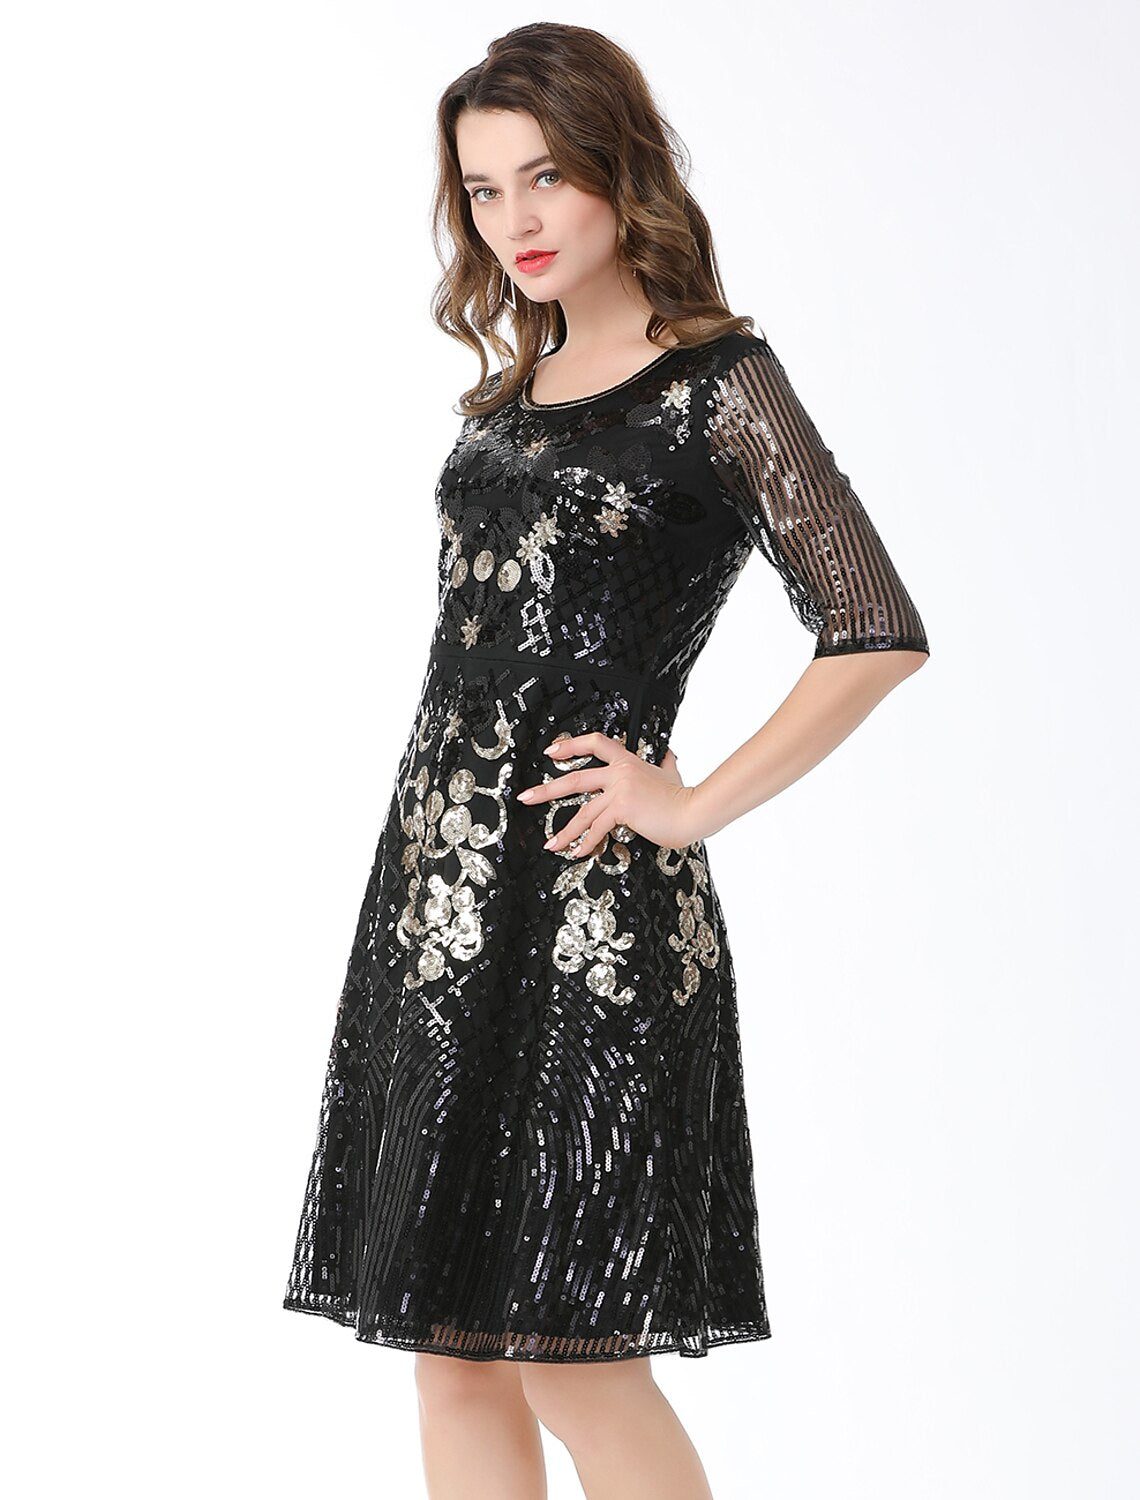 A-Line Cocktail Dresses Vintage Dress Holiday Knee Length Half Sleeve Jewel Neck Cotton Blend with Sequin Splicing